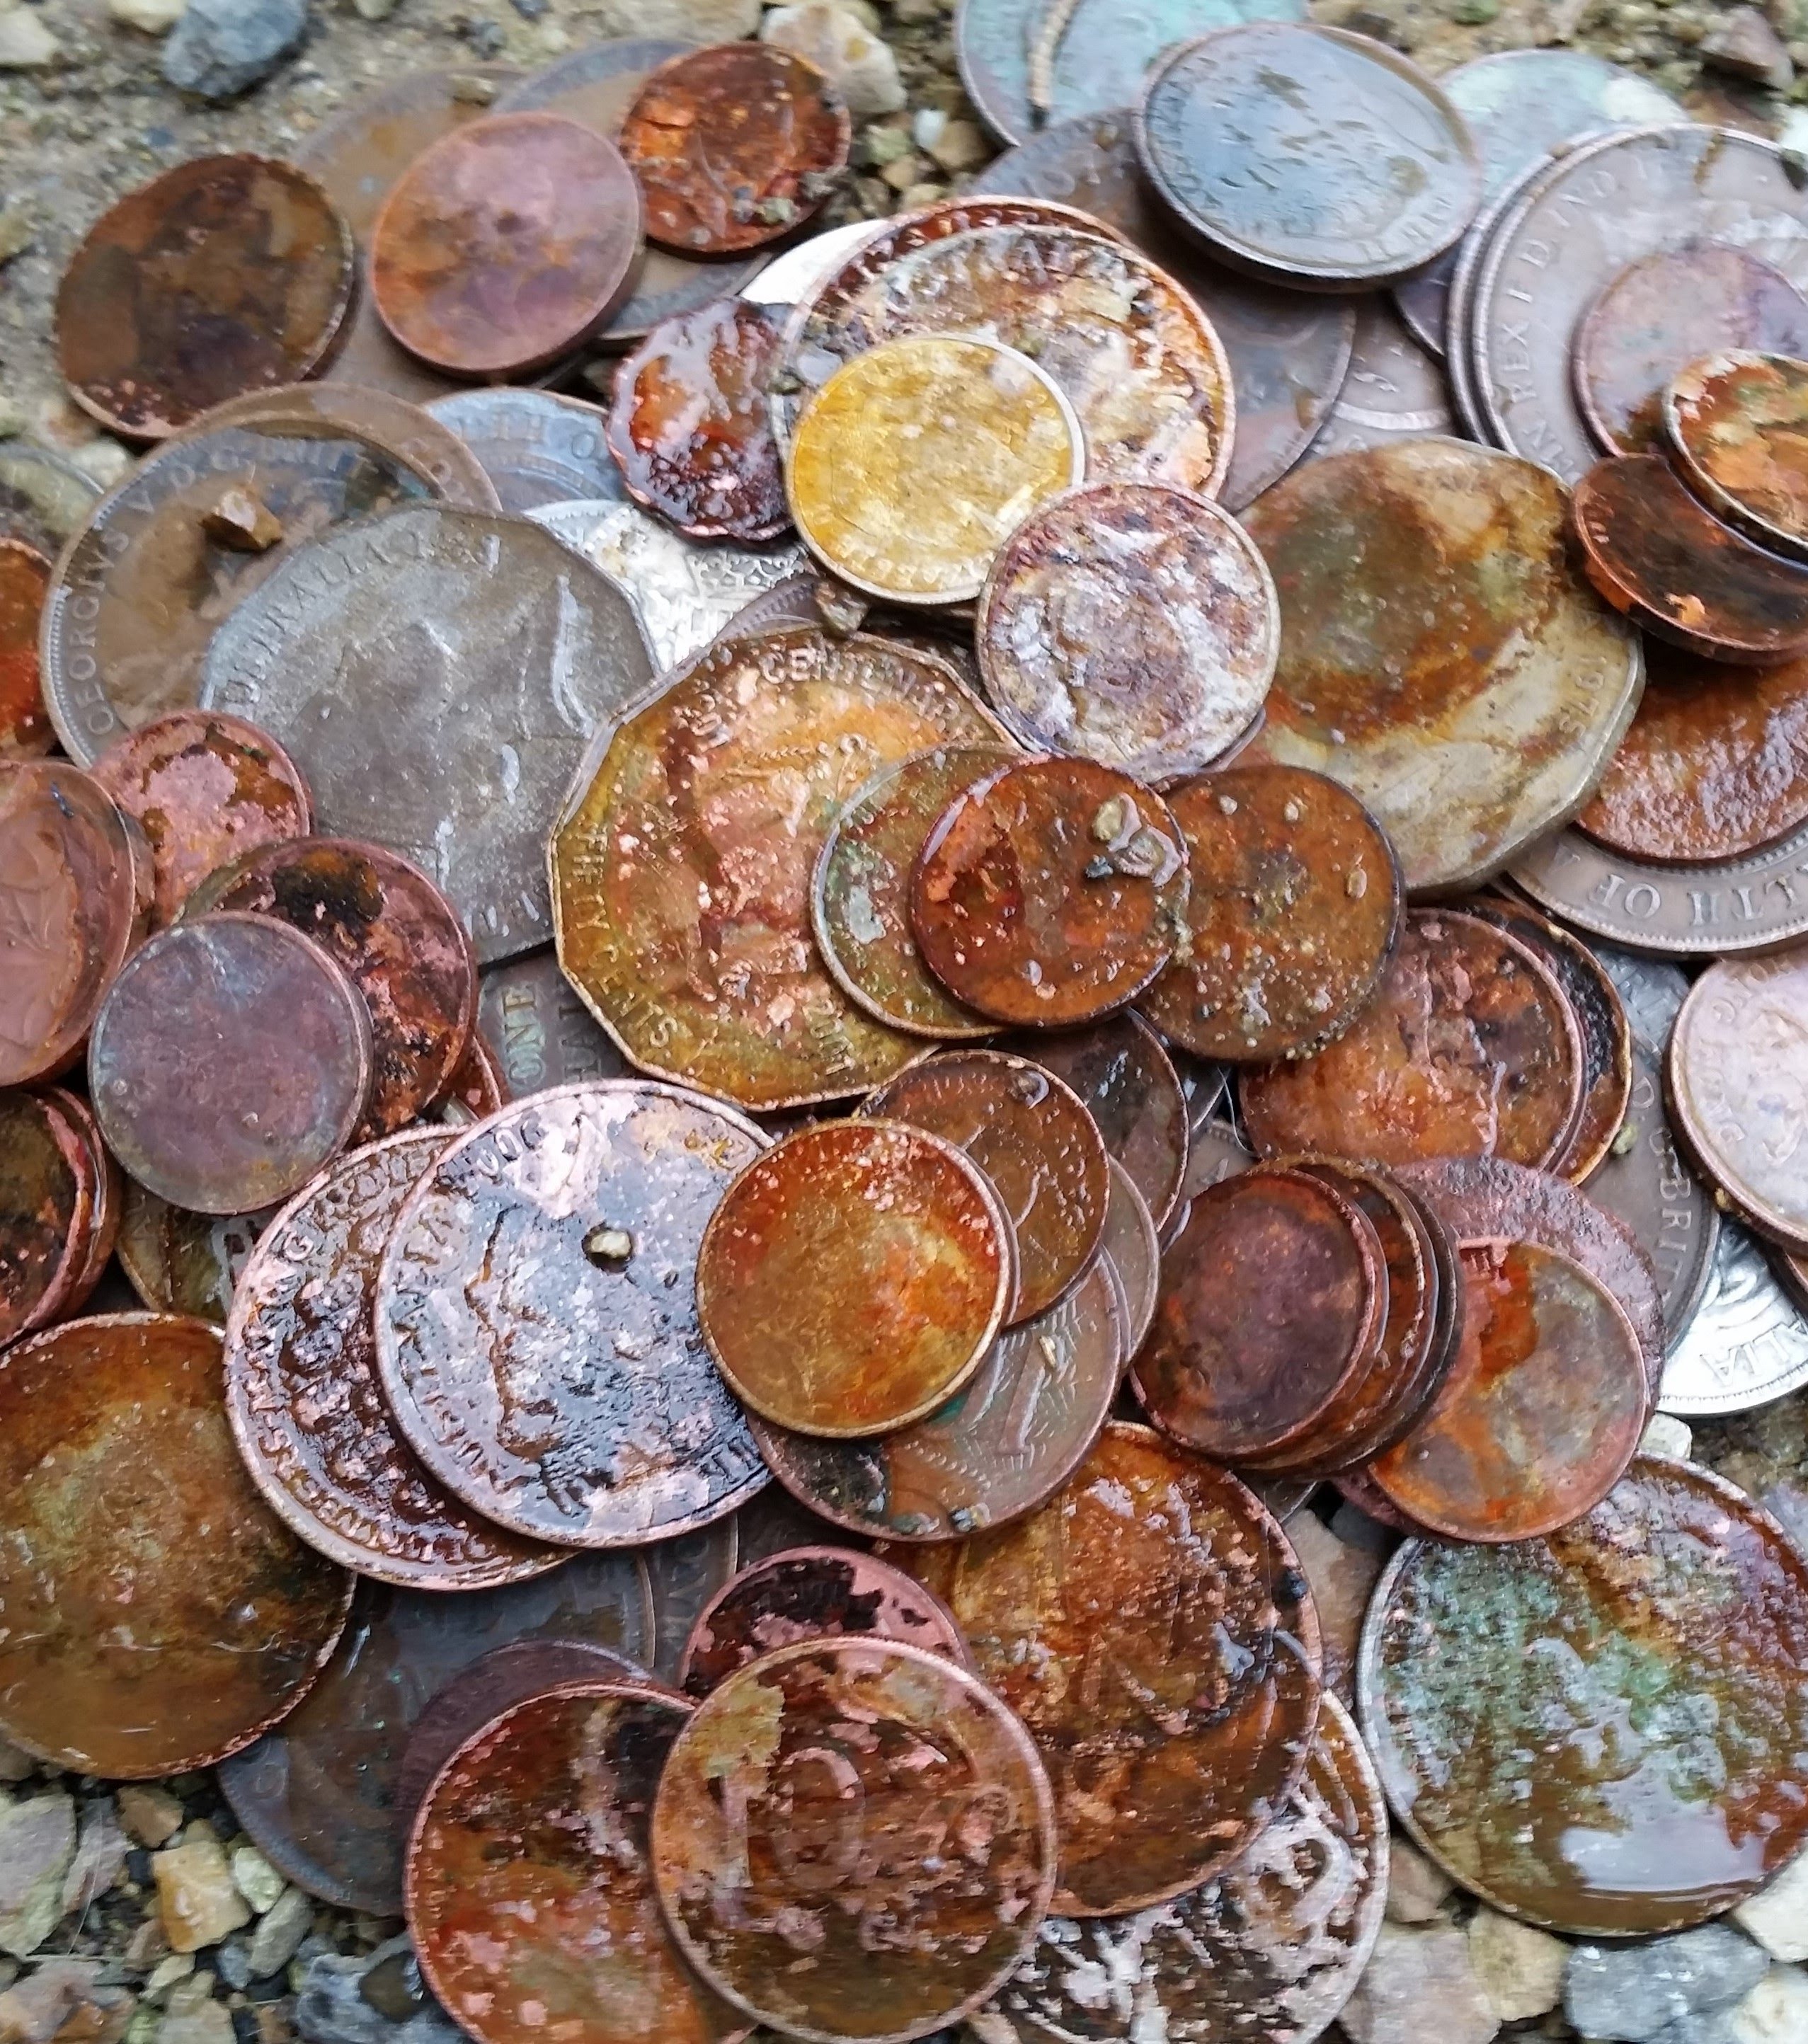 Huge Stash of Coins Found at Beach - YouTube